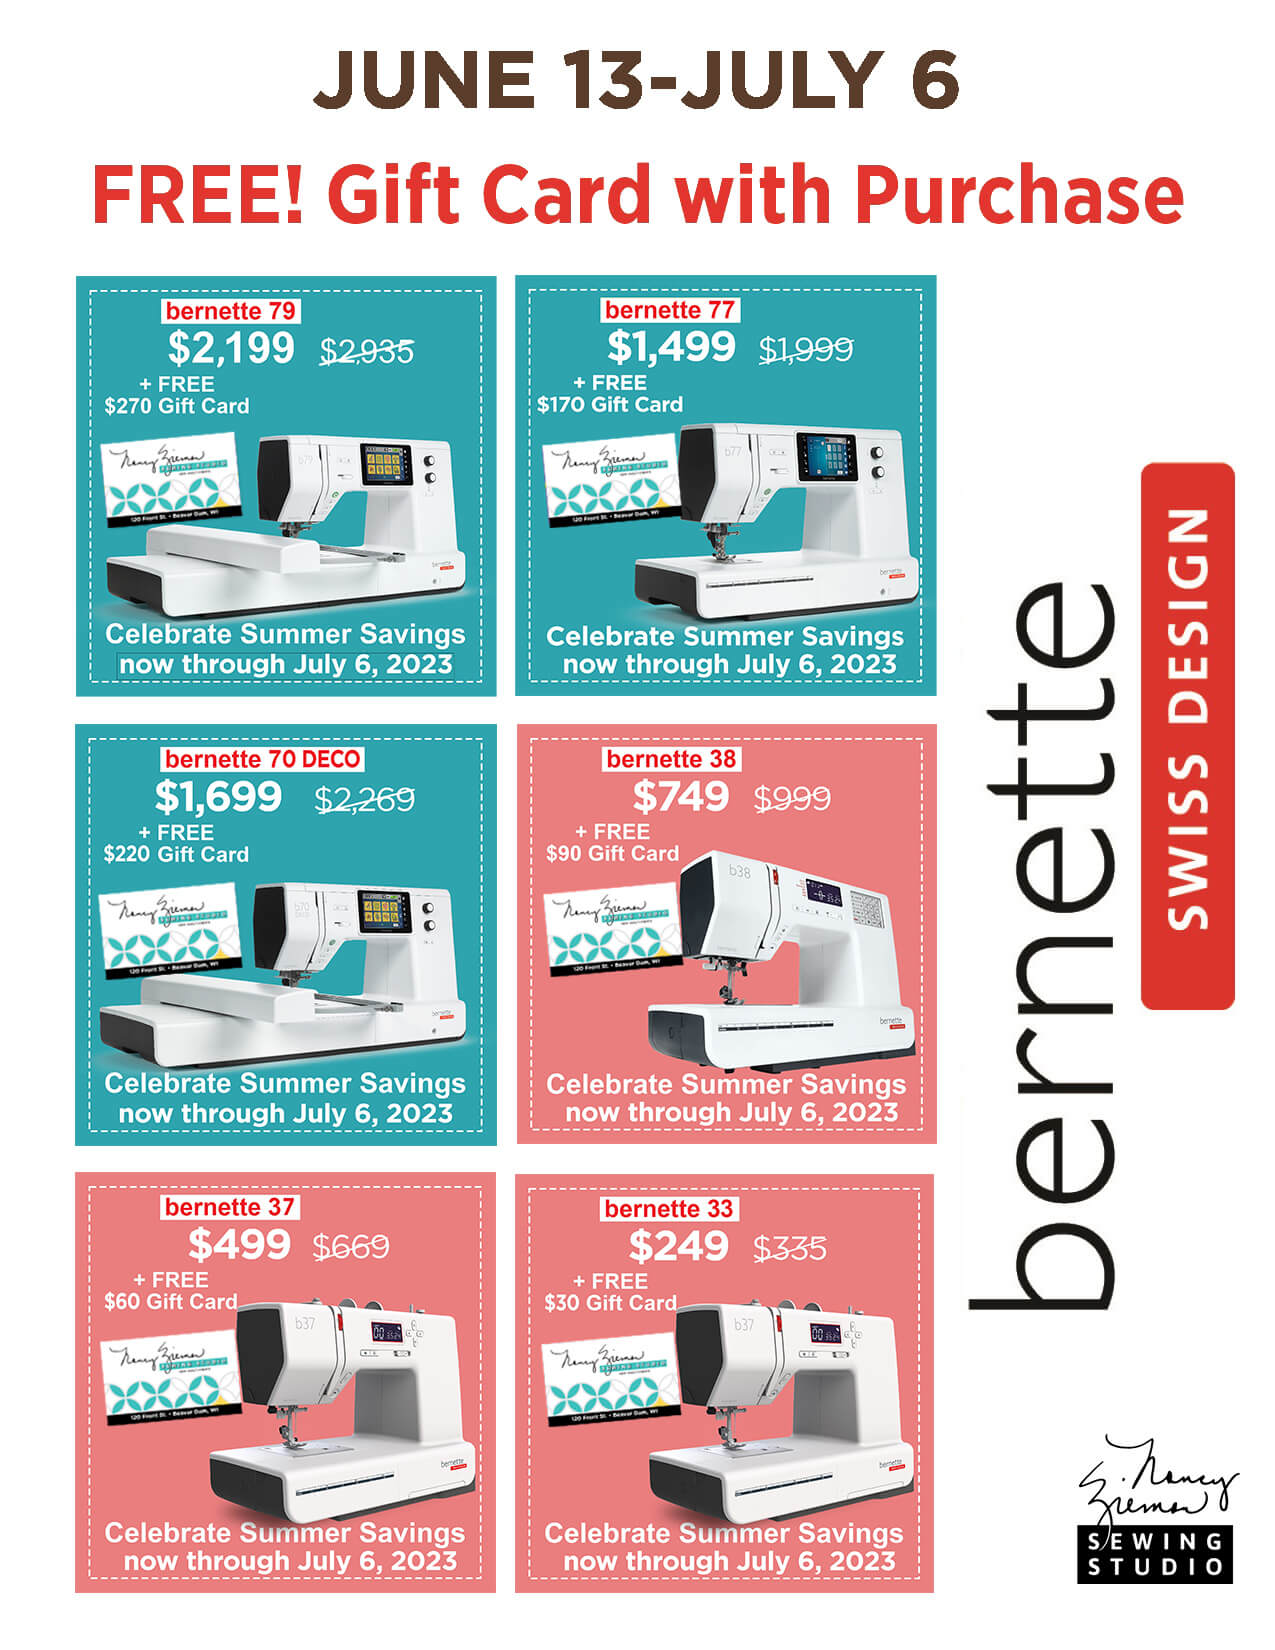 bernette FREE Gift Card with Purchase 01